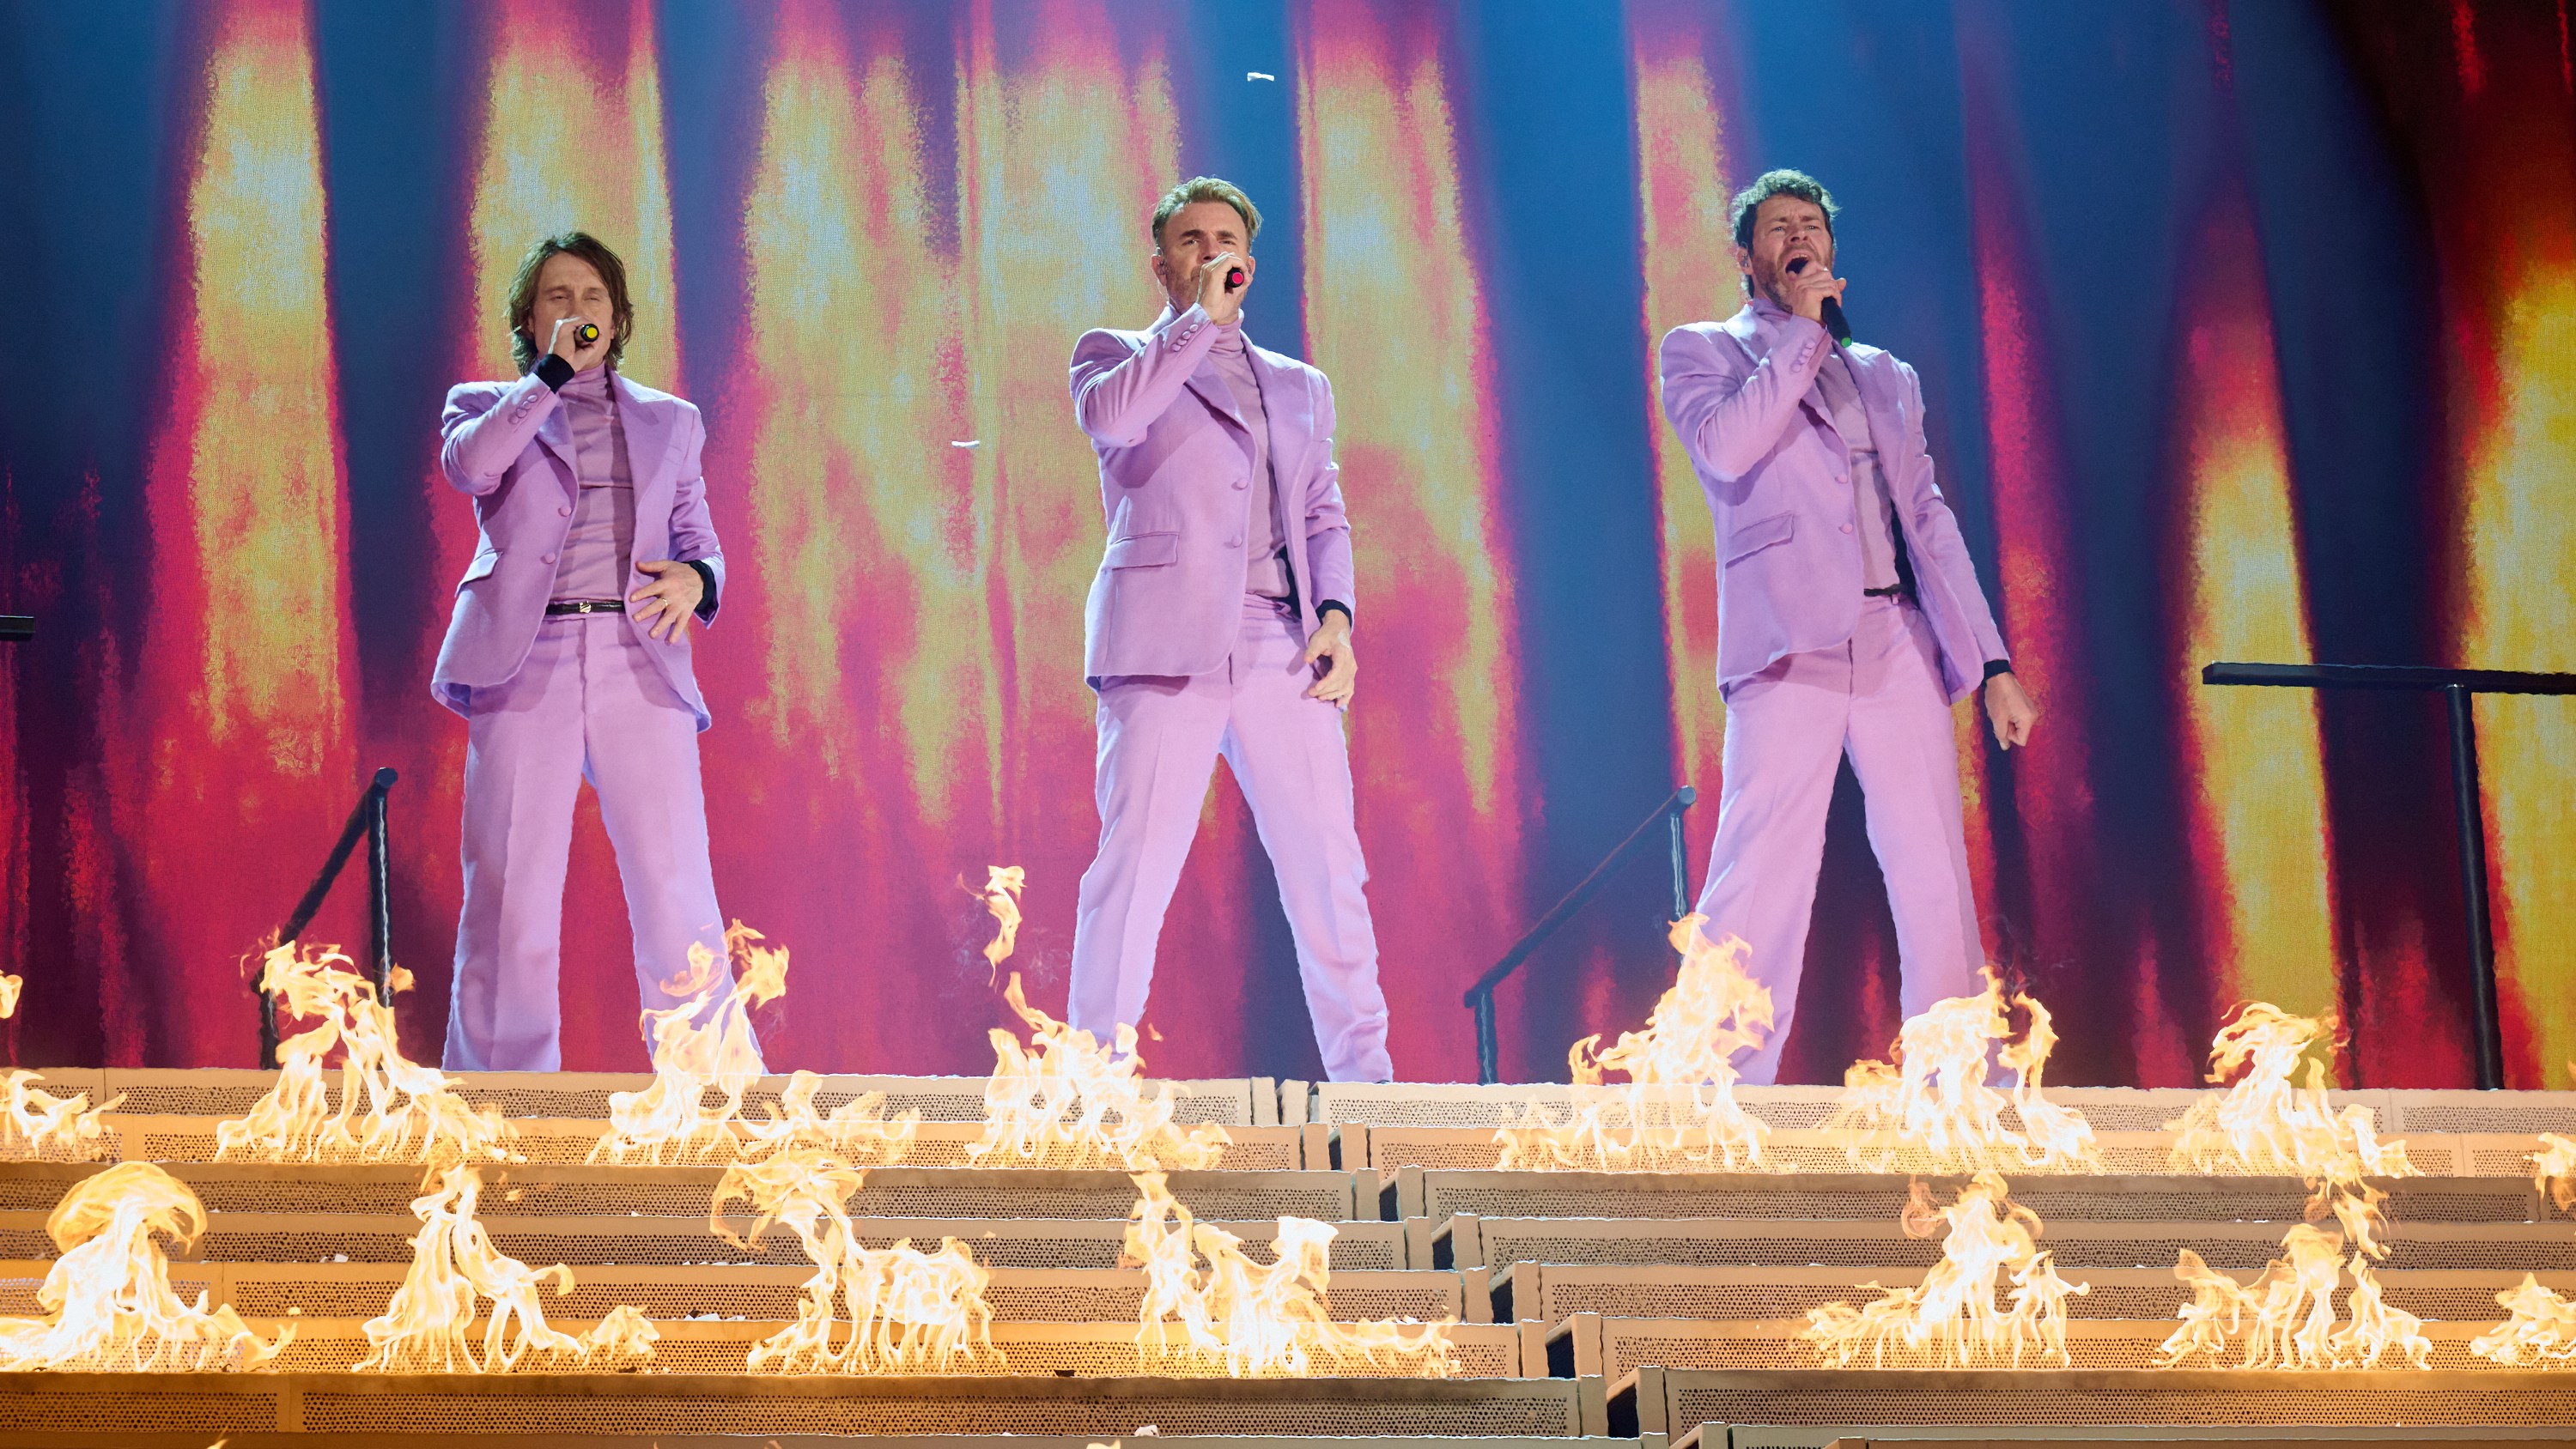 Take That — a fabulous and unexpectedly funny first night of the tour